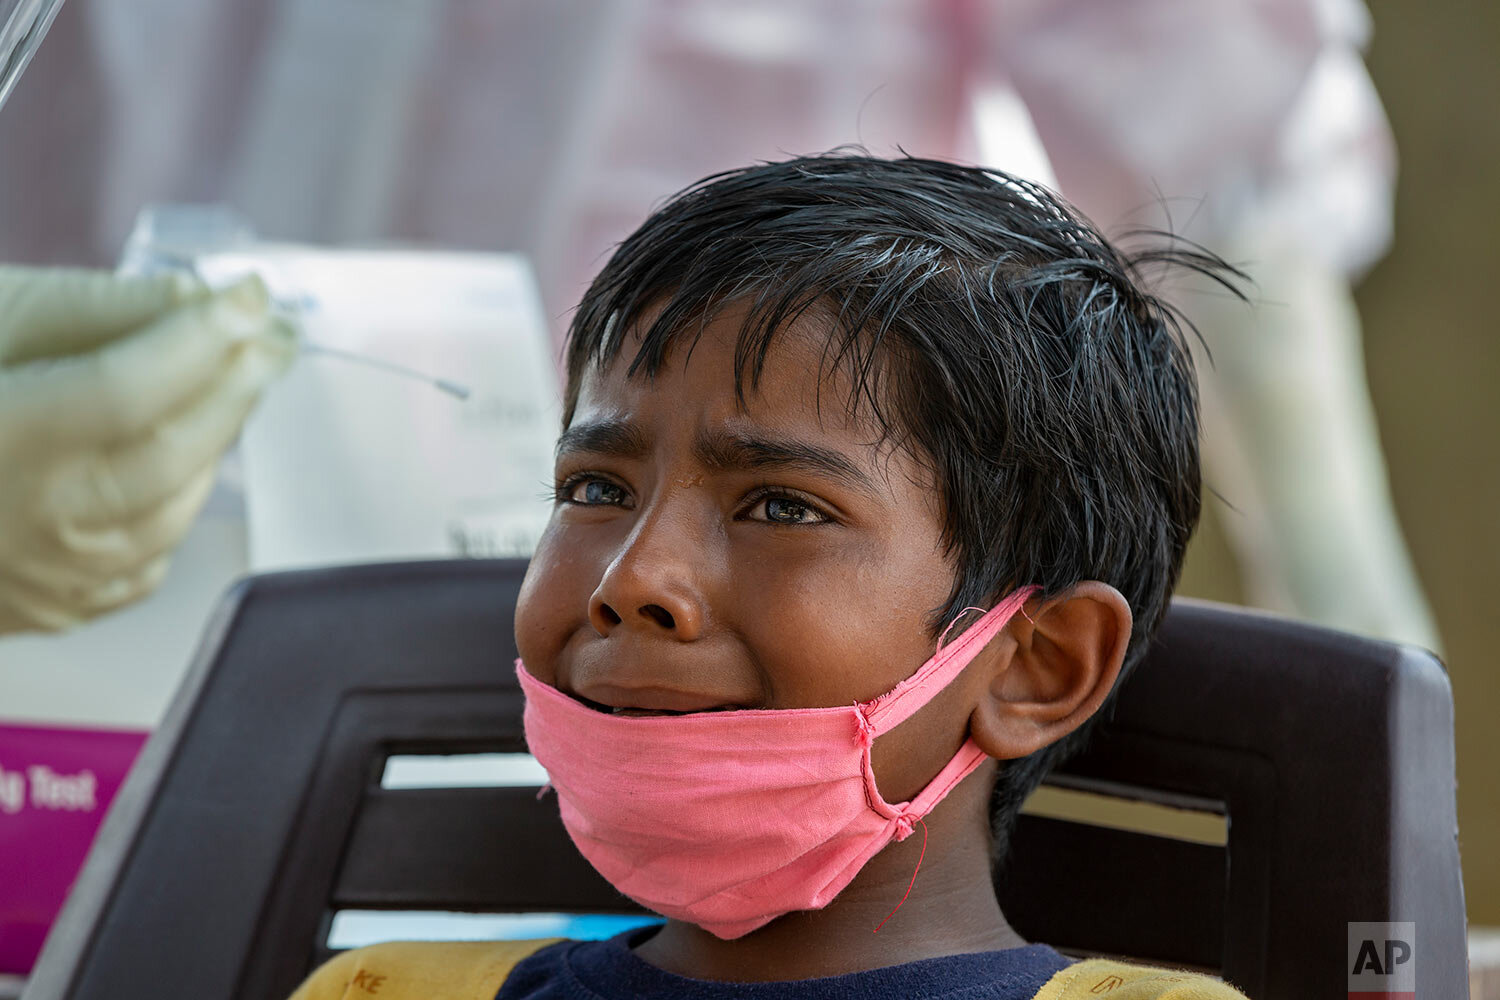  An Indian boy cries as a medical worker prepares to collect his swab sample for COVID-19 test at a rural health centre in Bagli, outskirts of Dharmsala, India, Monday, Sept. 7, 2020. (AP Photo/Ashwini Bhatia) 